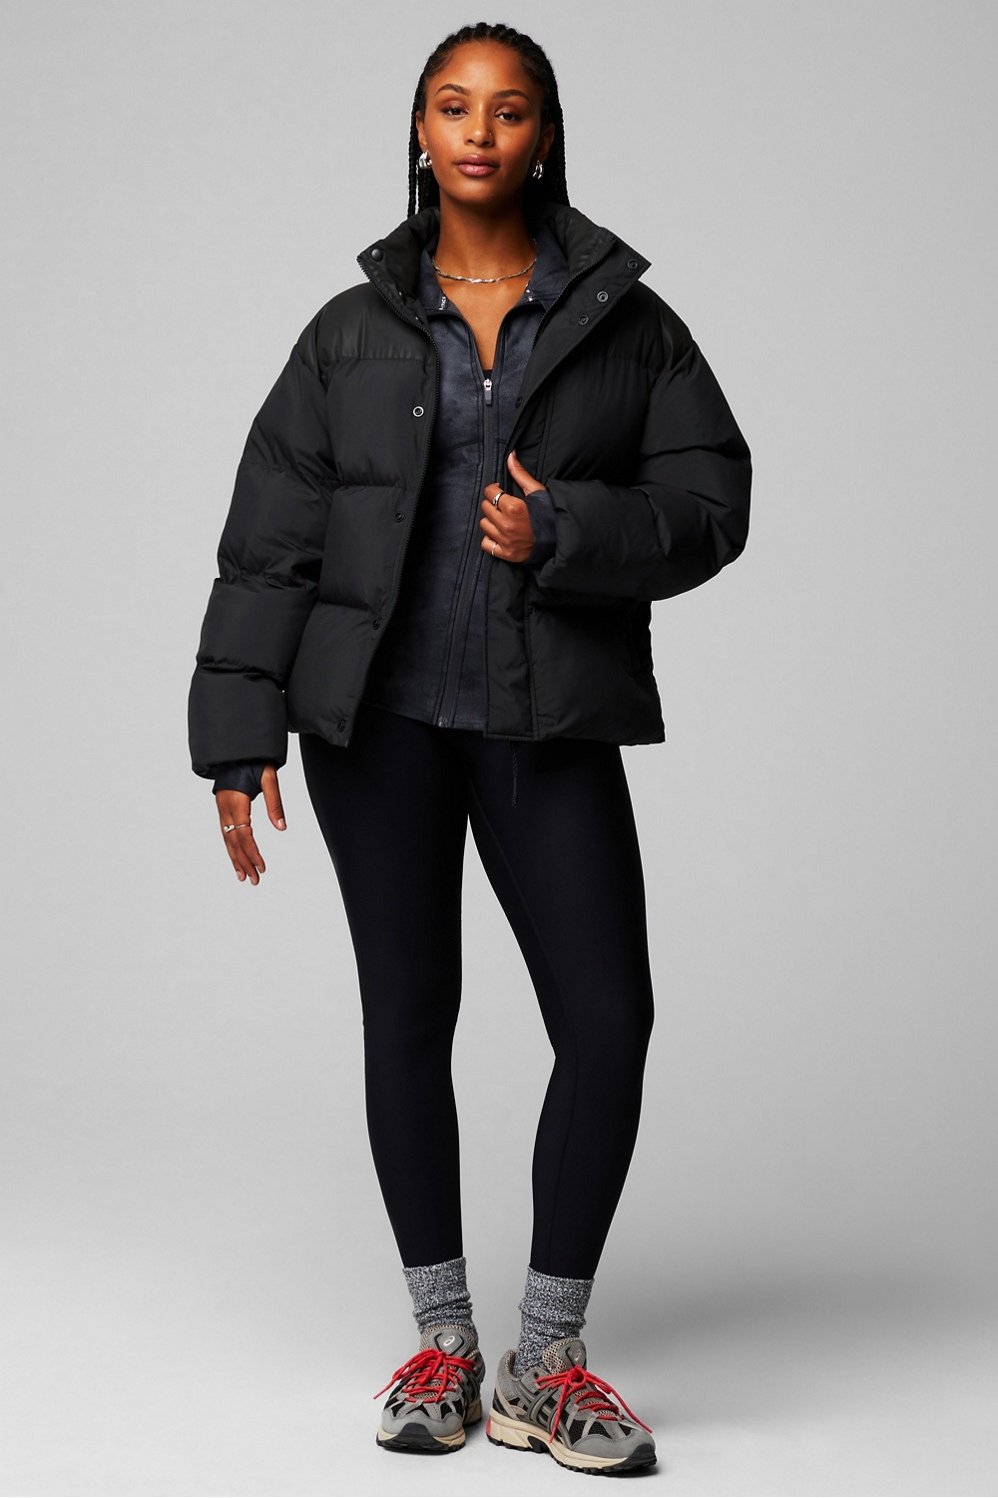 Fabletics Black Puffer Jacket - $22 (56% Off Retail) - From Georgia